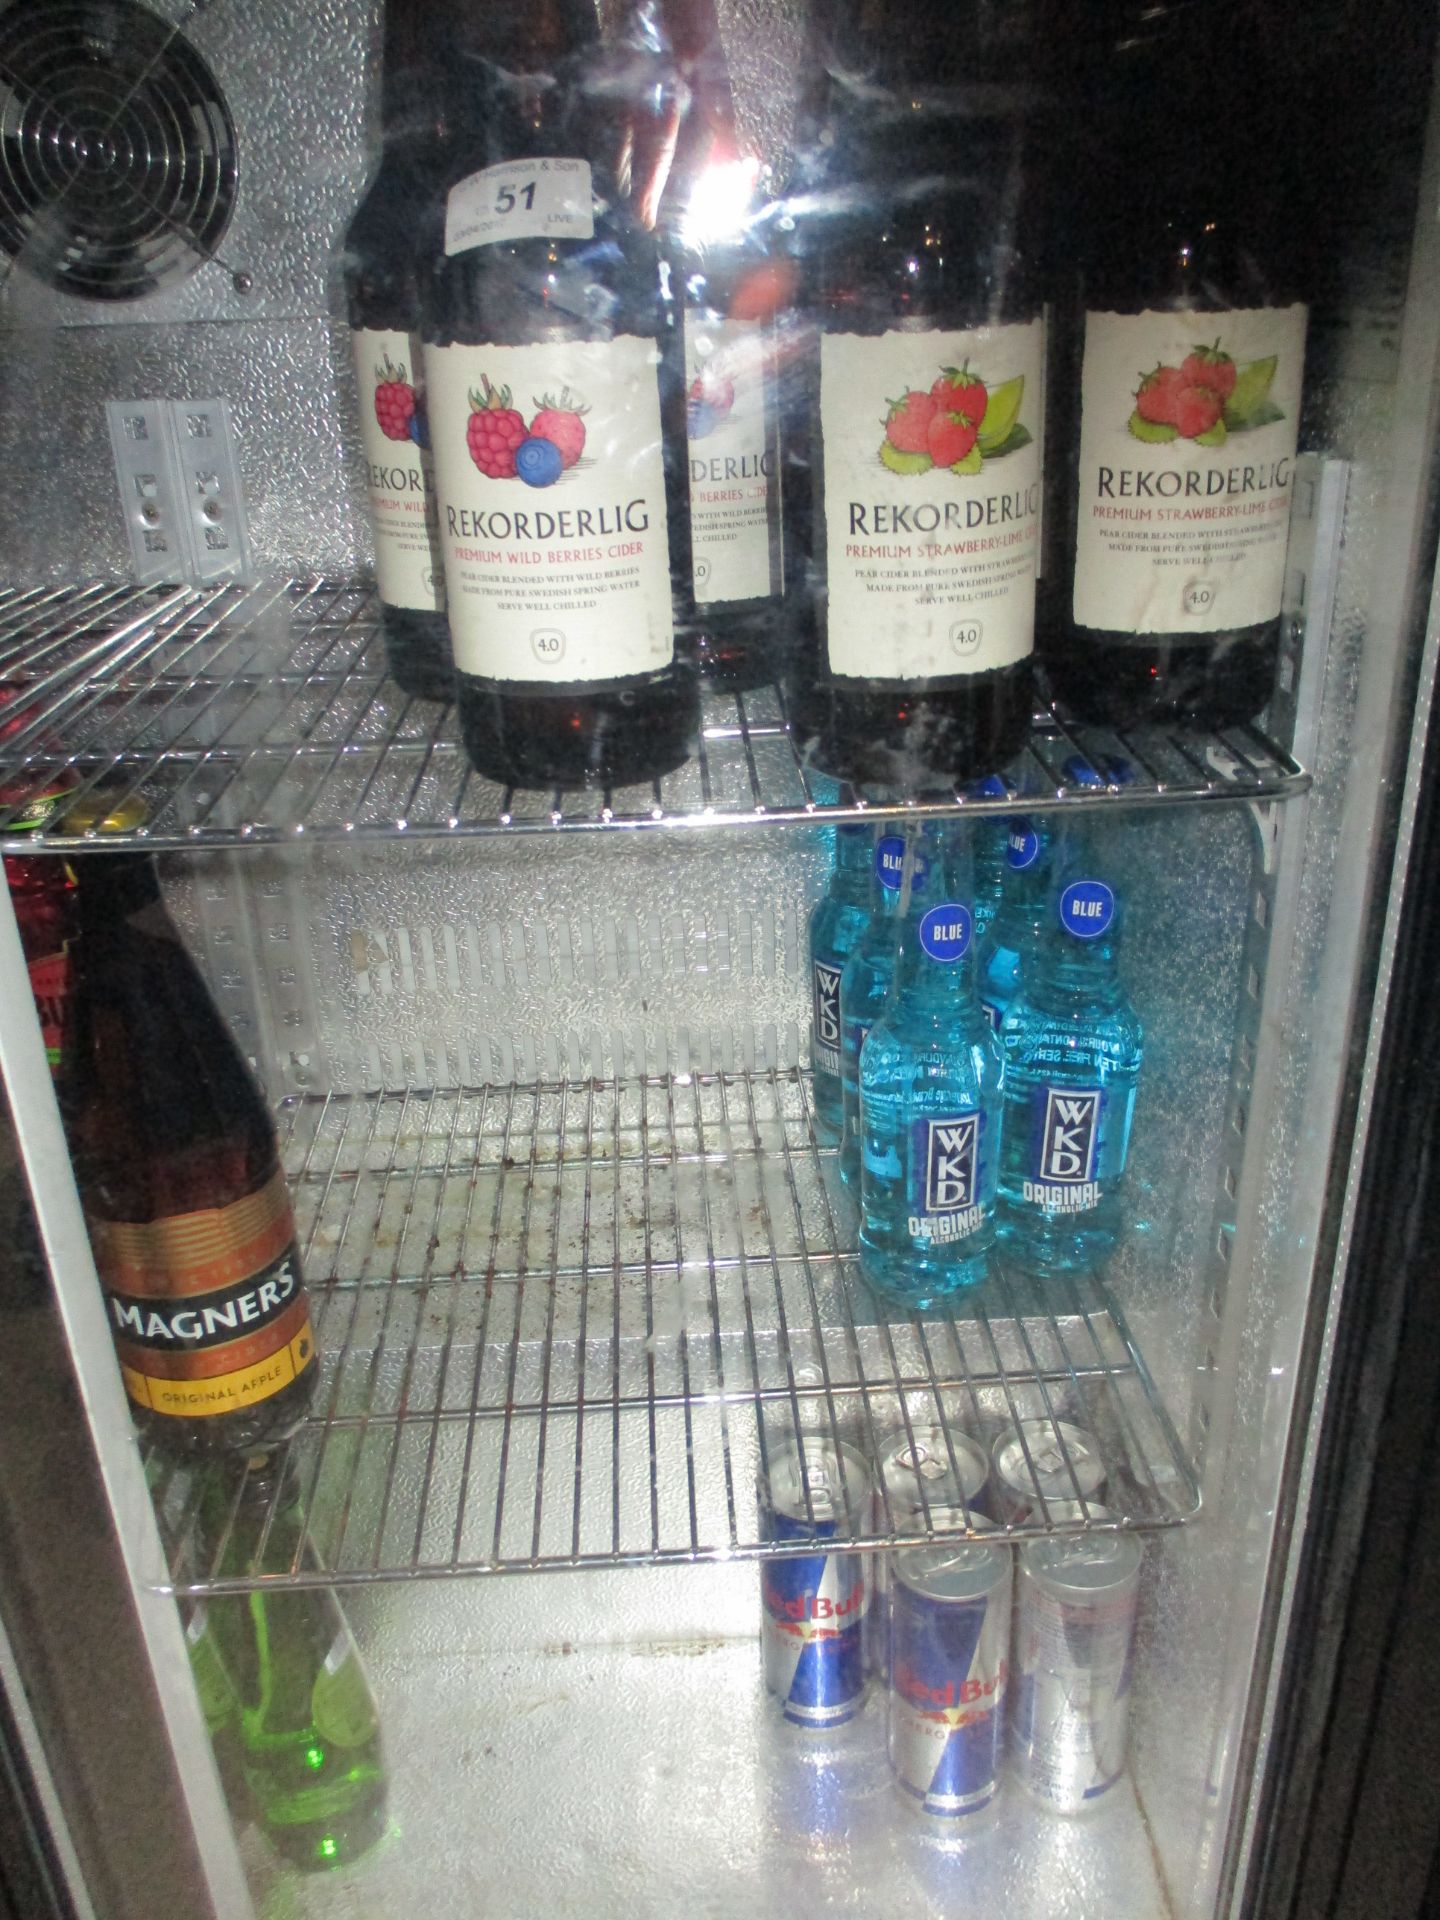 Contents to two under counter fridges - bottles of Magners and Recorderlig cider, WKD, Fruit Shoot,